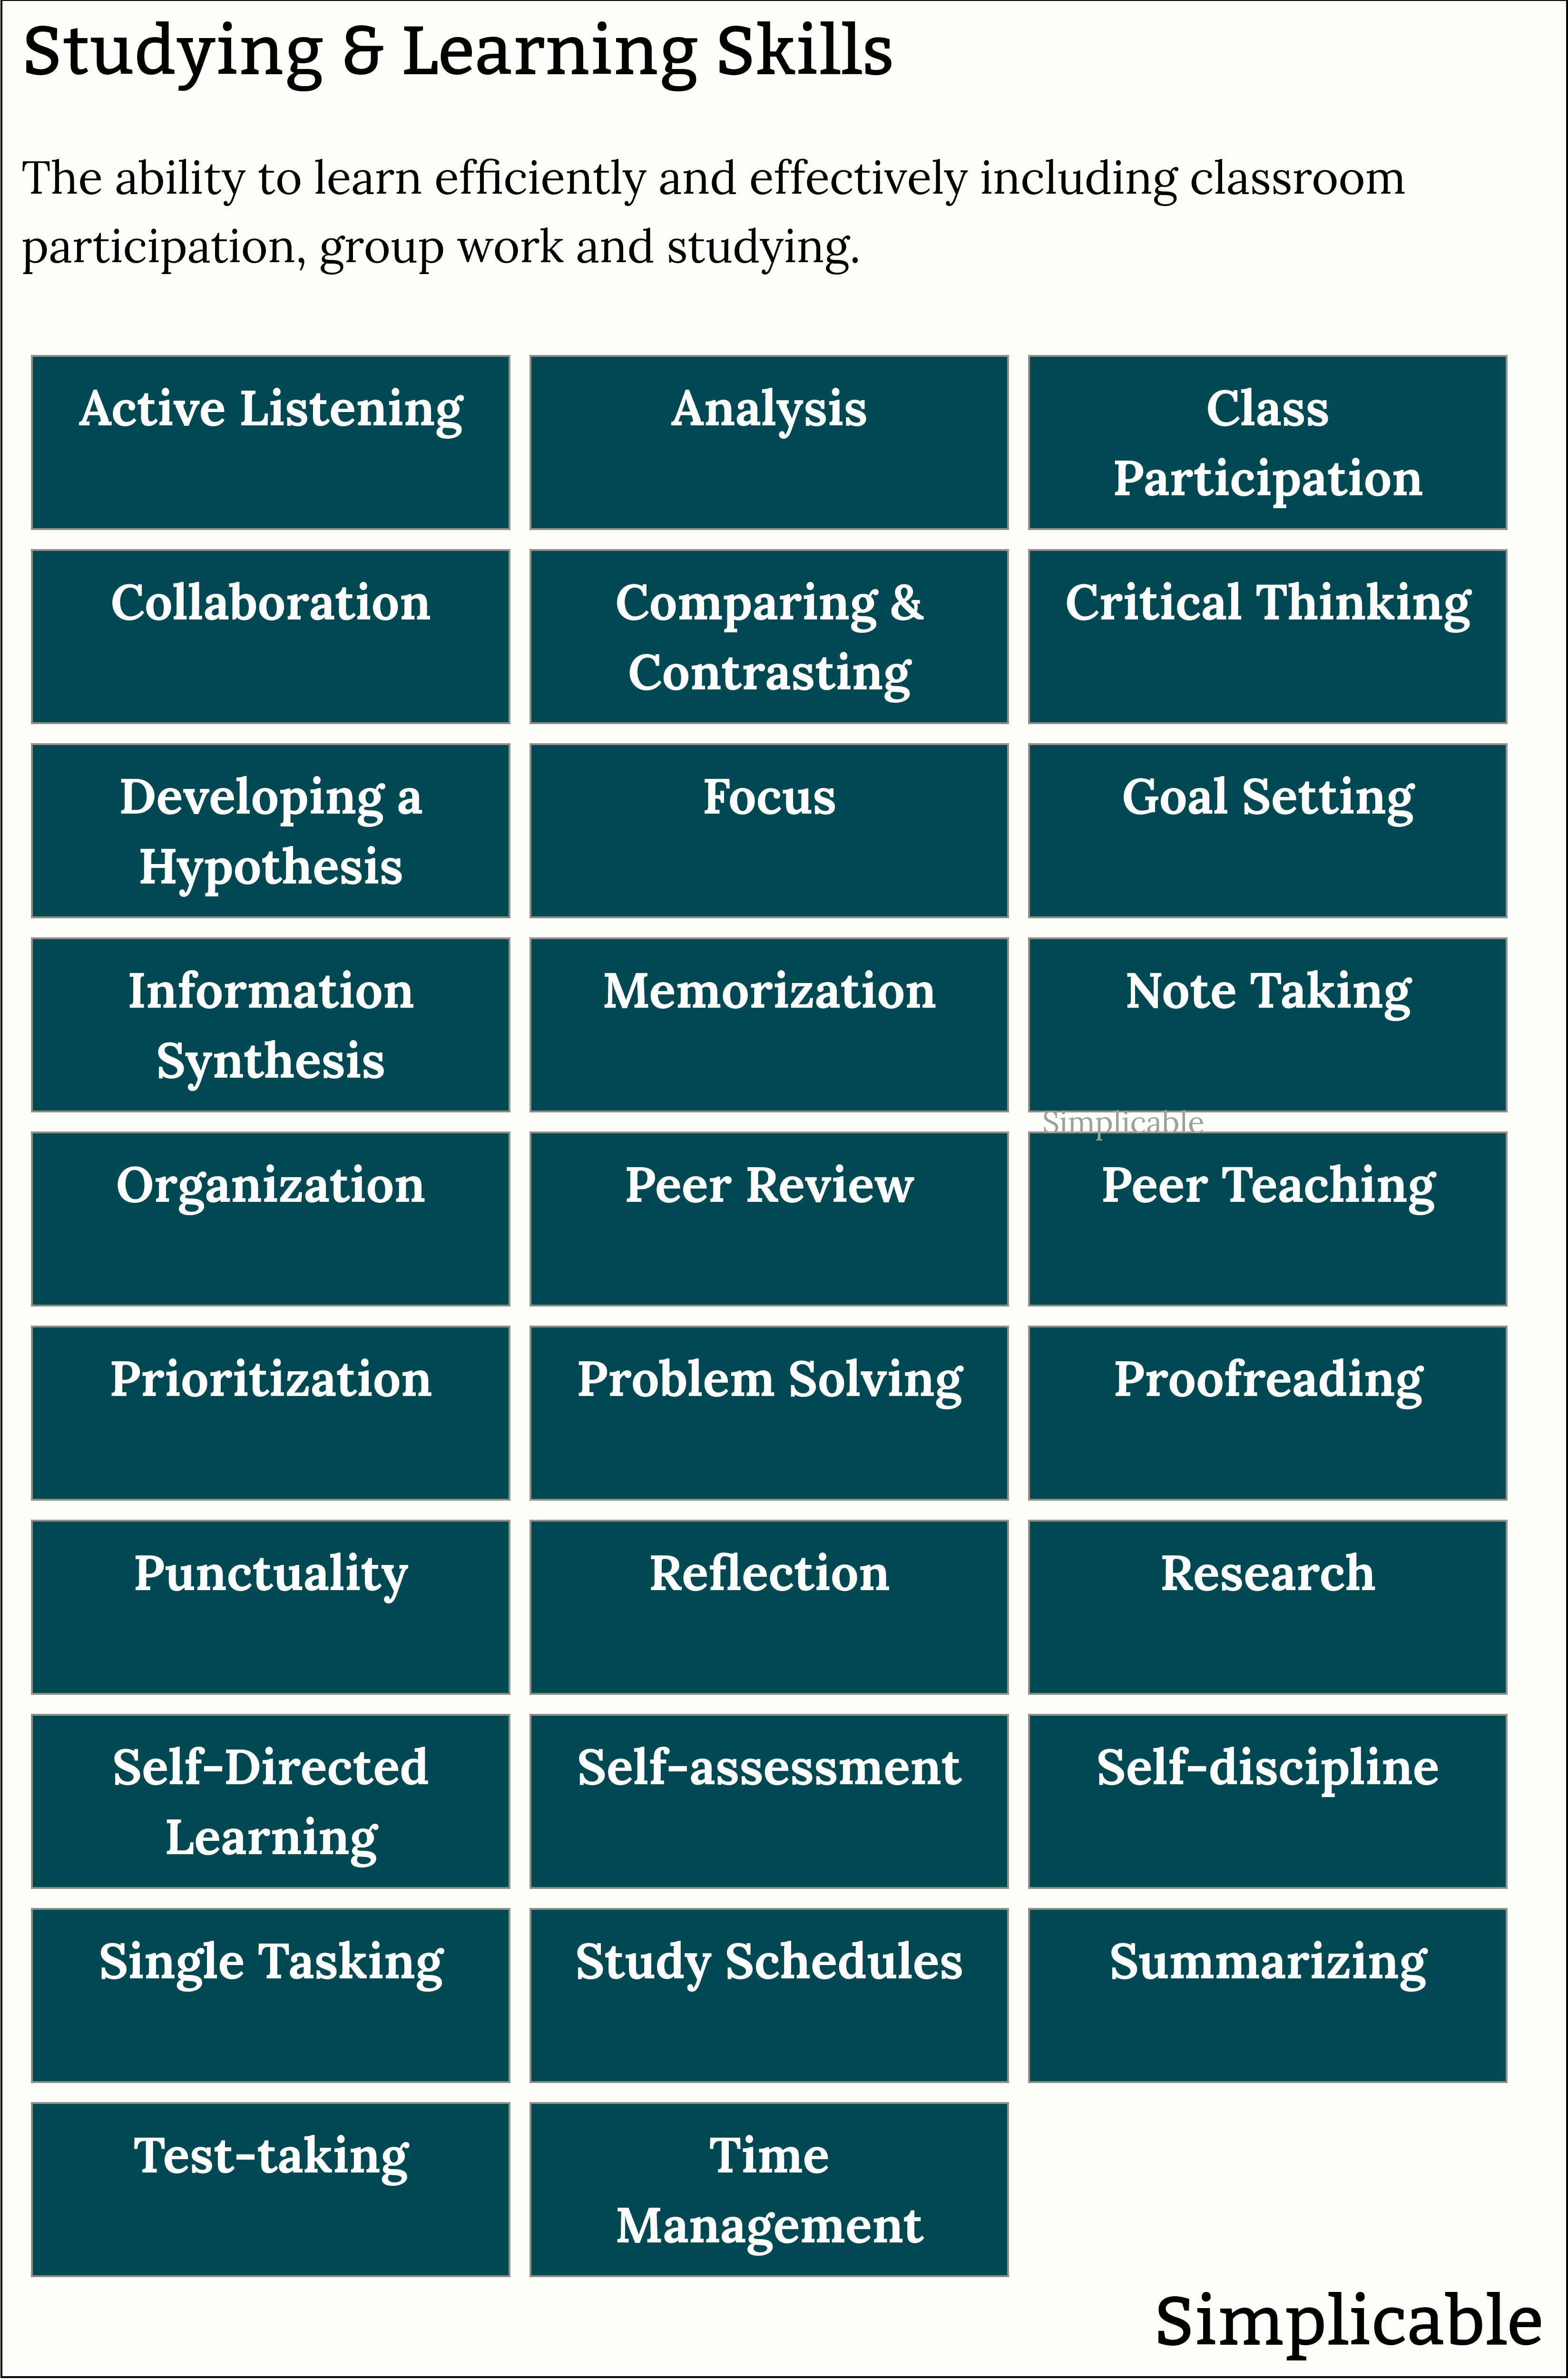 examples of studying and learning skills